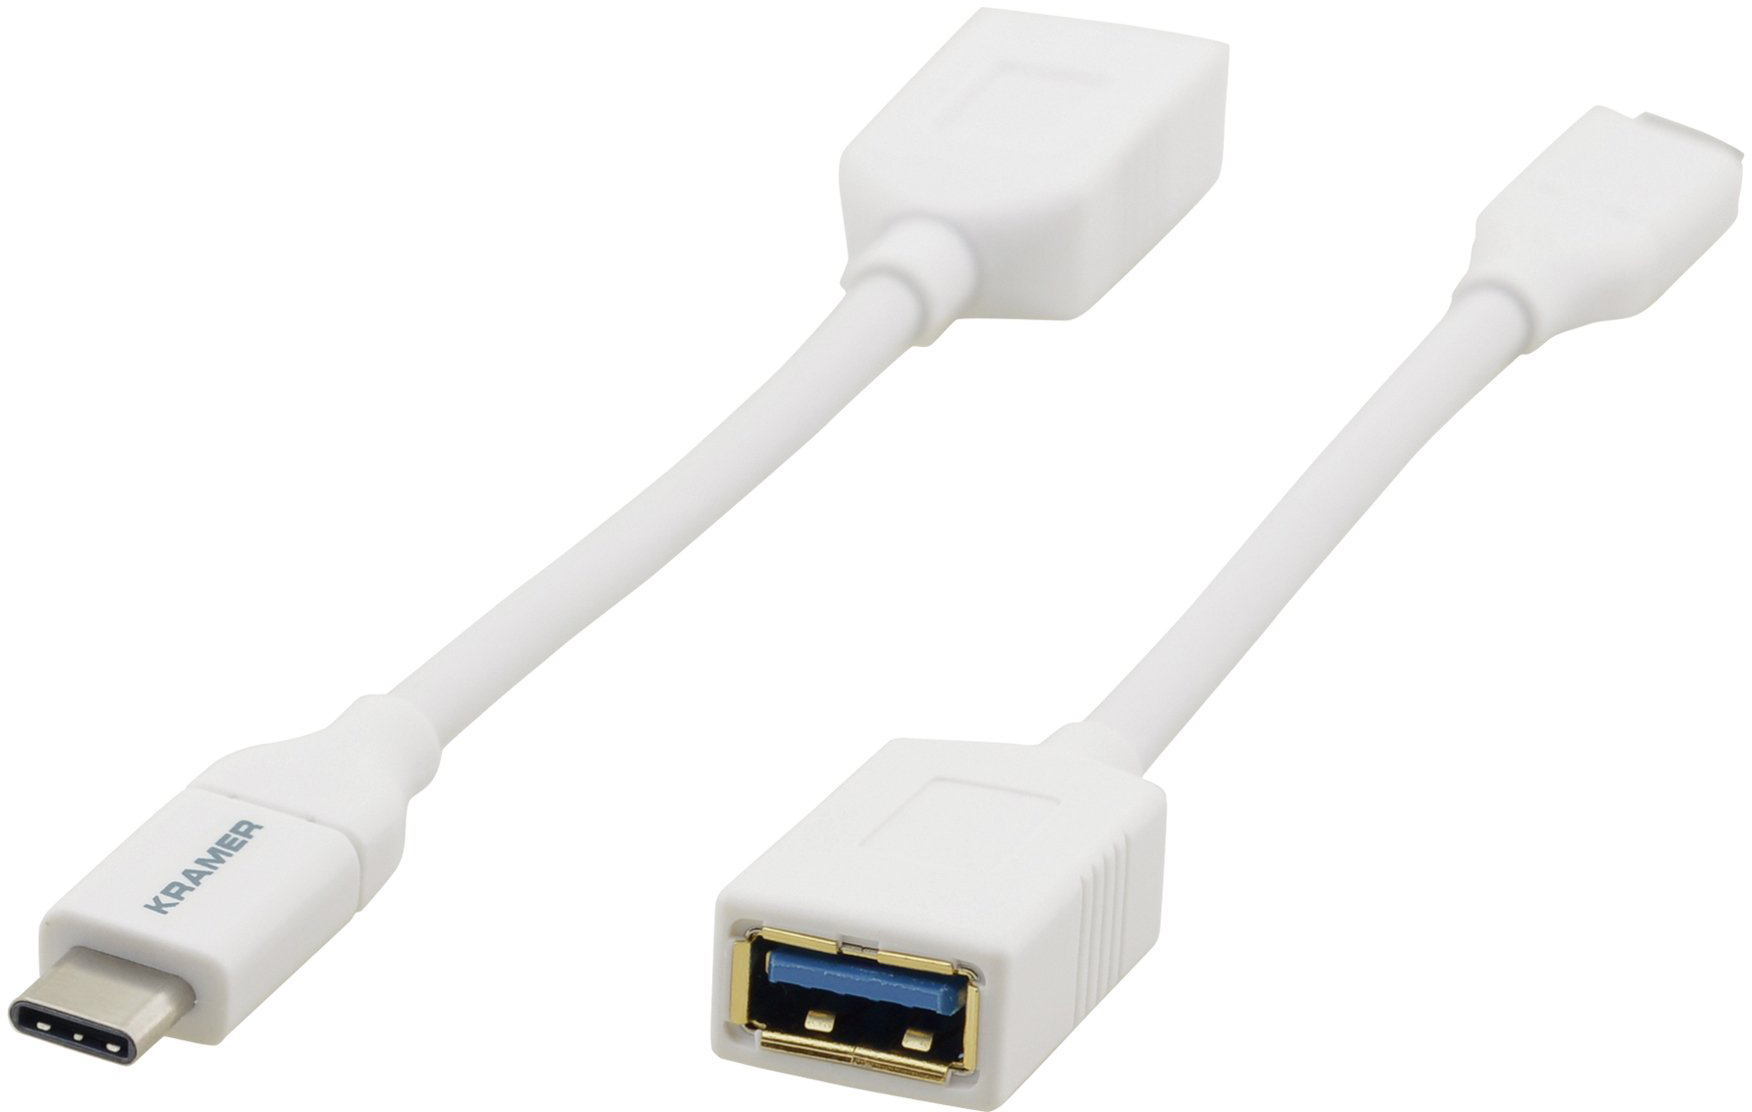 You Recently Viewed Kramer ADC-USB31/CAE USB 3.1 C(M) to A(F) Adapter Cable Image